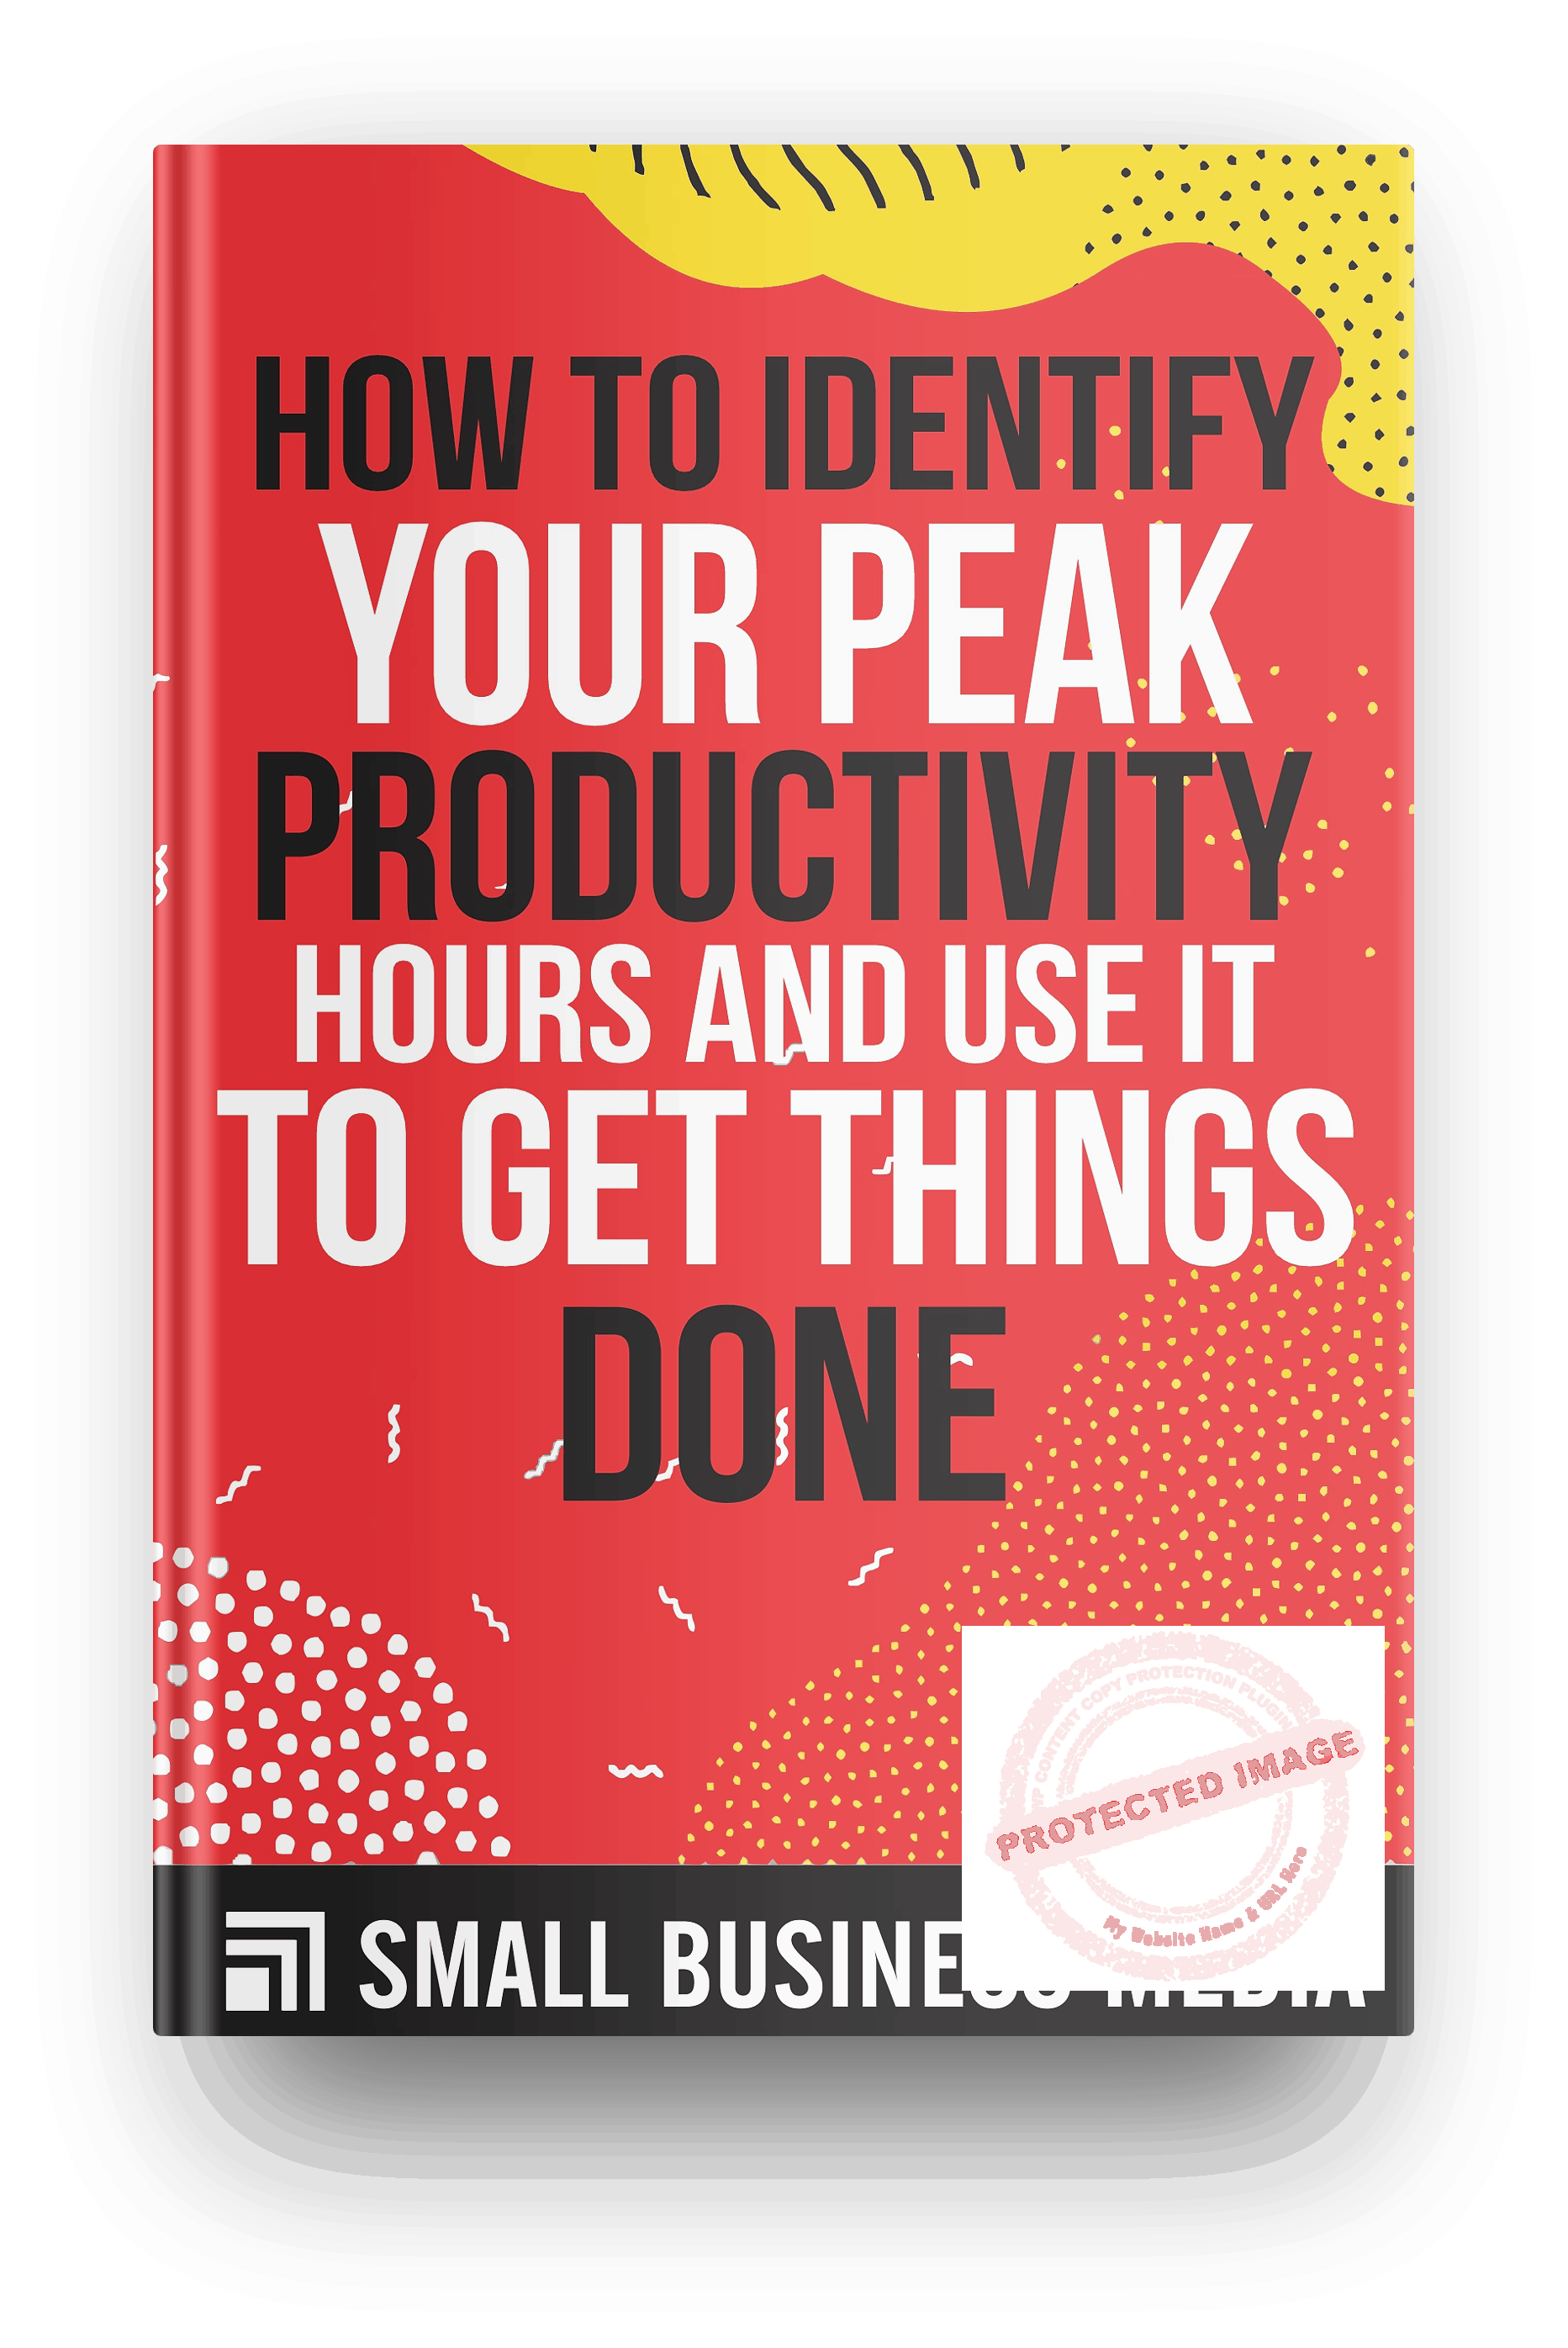 How To Identify Your Peak Productivity Hours And Use It To Get Things Done